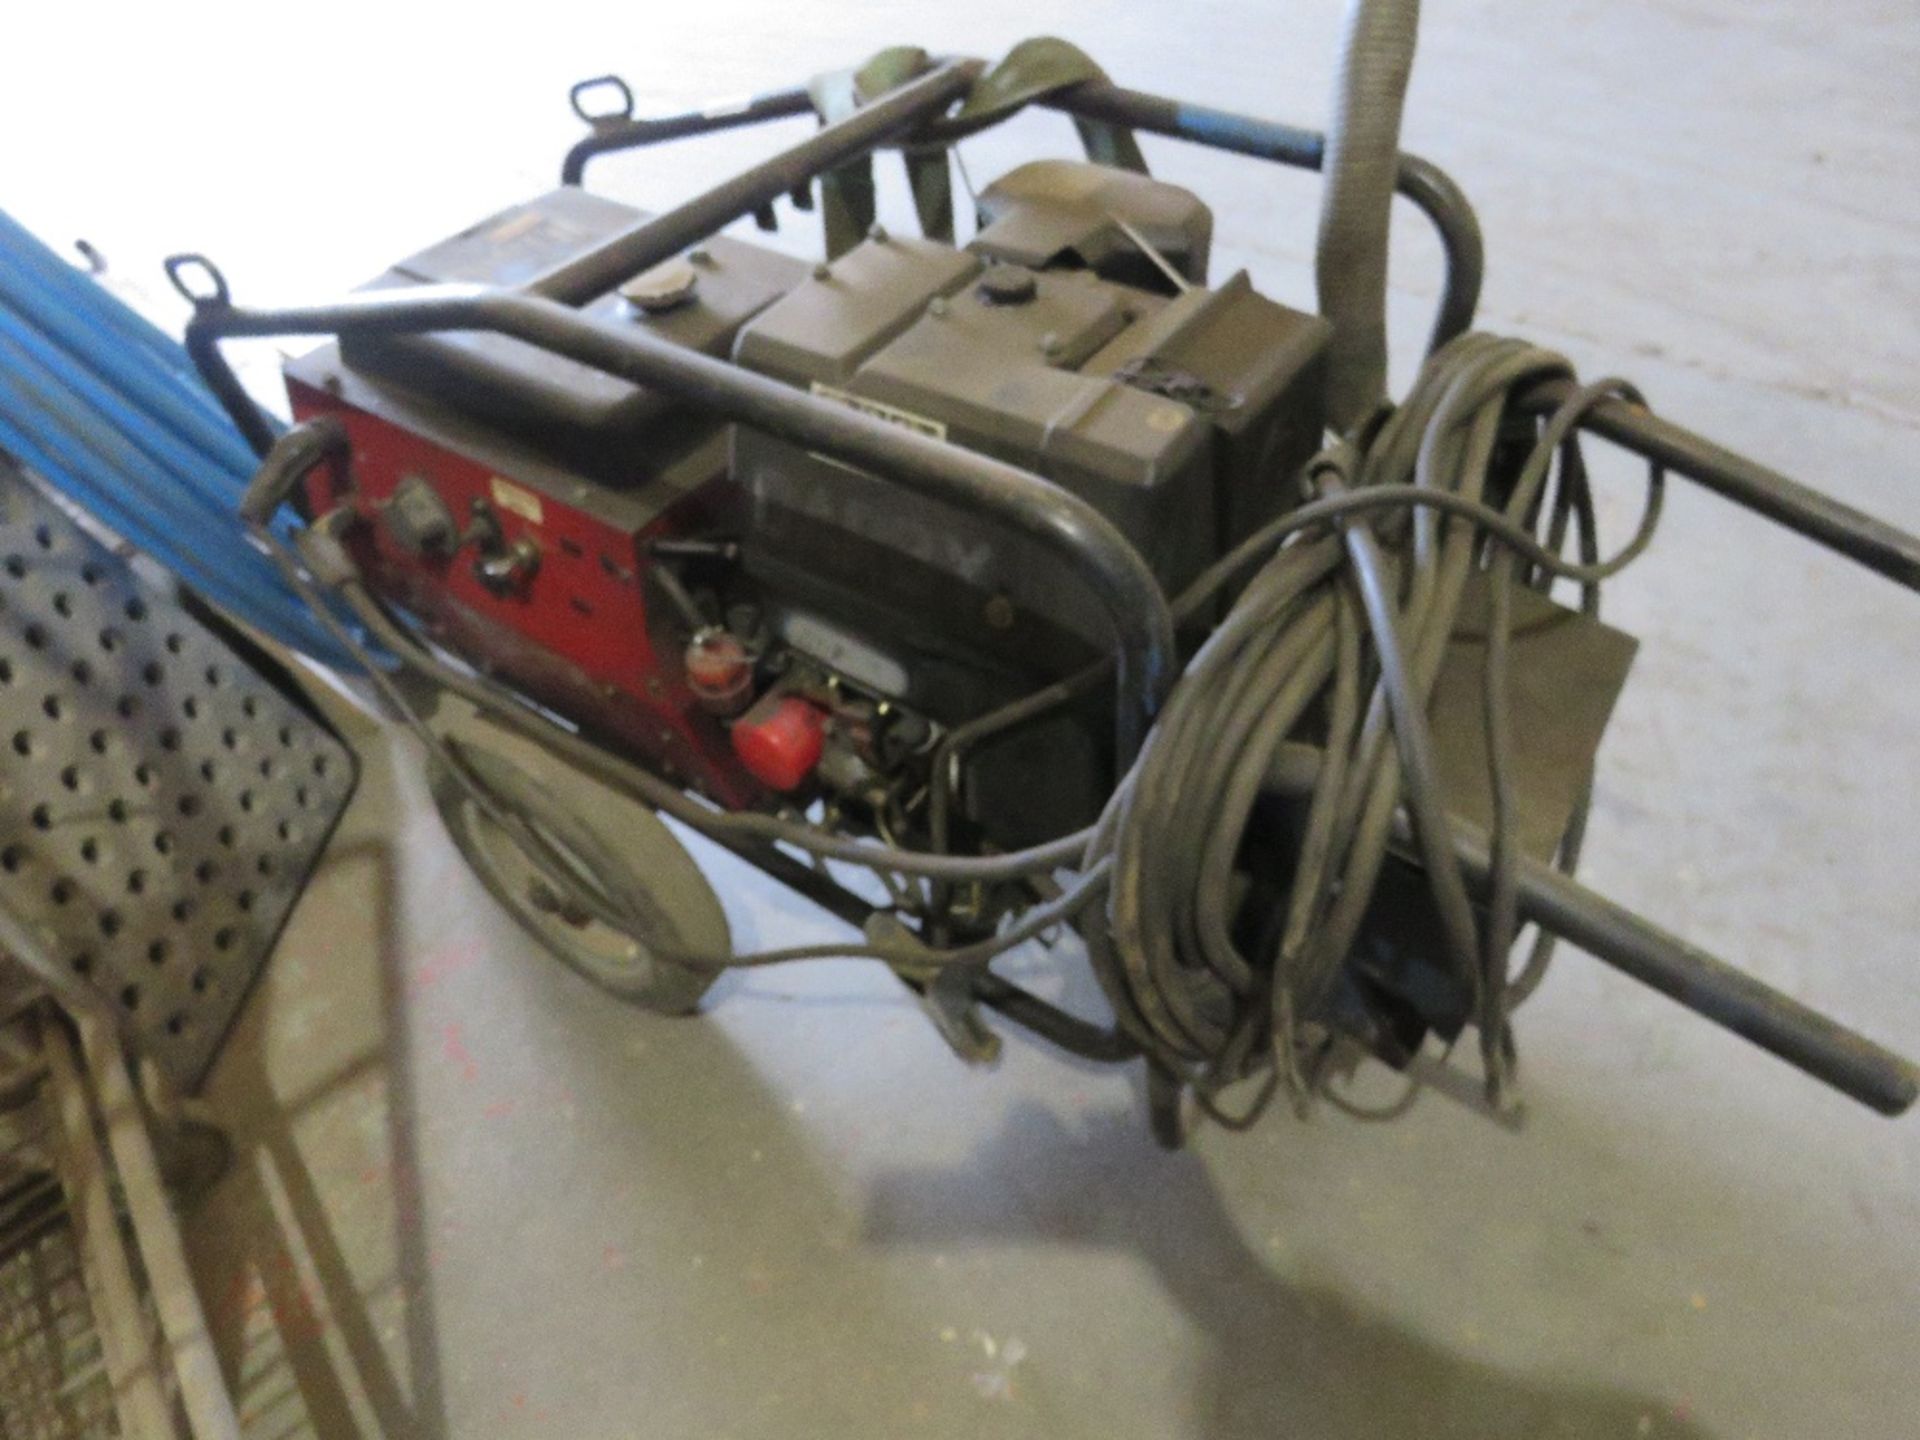 MOSA DIESEL POWERED WELDER WITH LEADS. LOT LOCATION: SS13 1EF, BASILDON, ESSEX. - Image 2 of 3